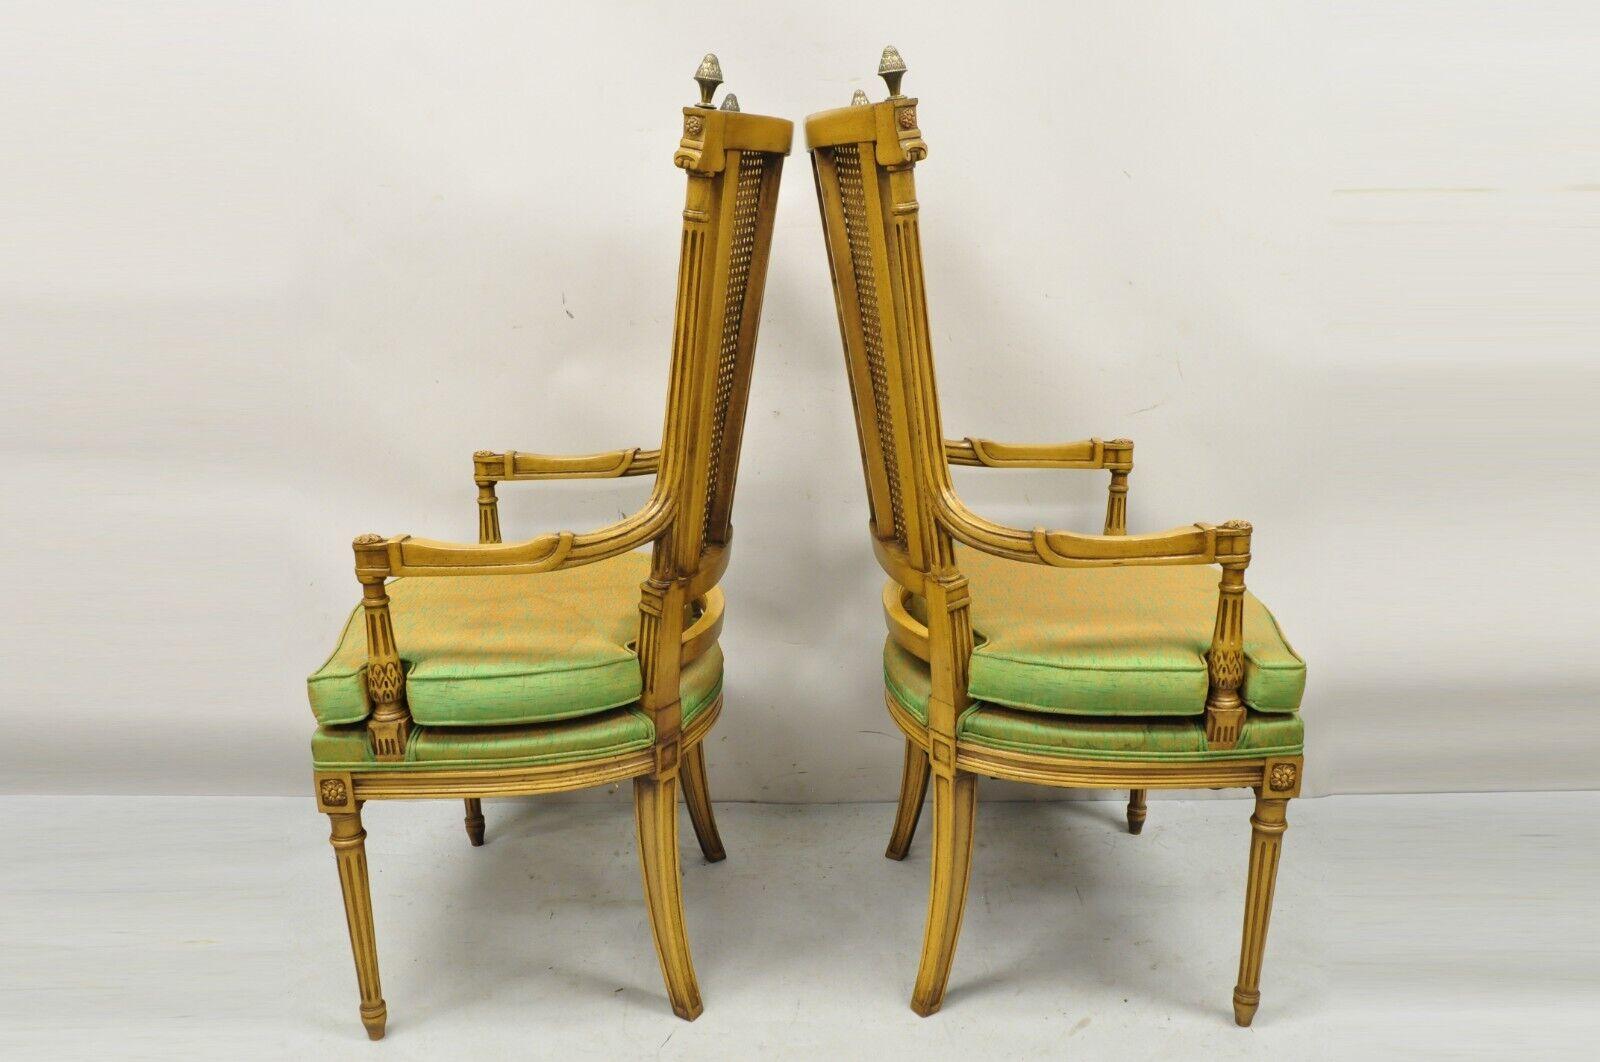 20th Century Vintage French Hollywood Regency Tall Cane Back Carved Link Chairs, a Pair For Sale